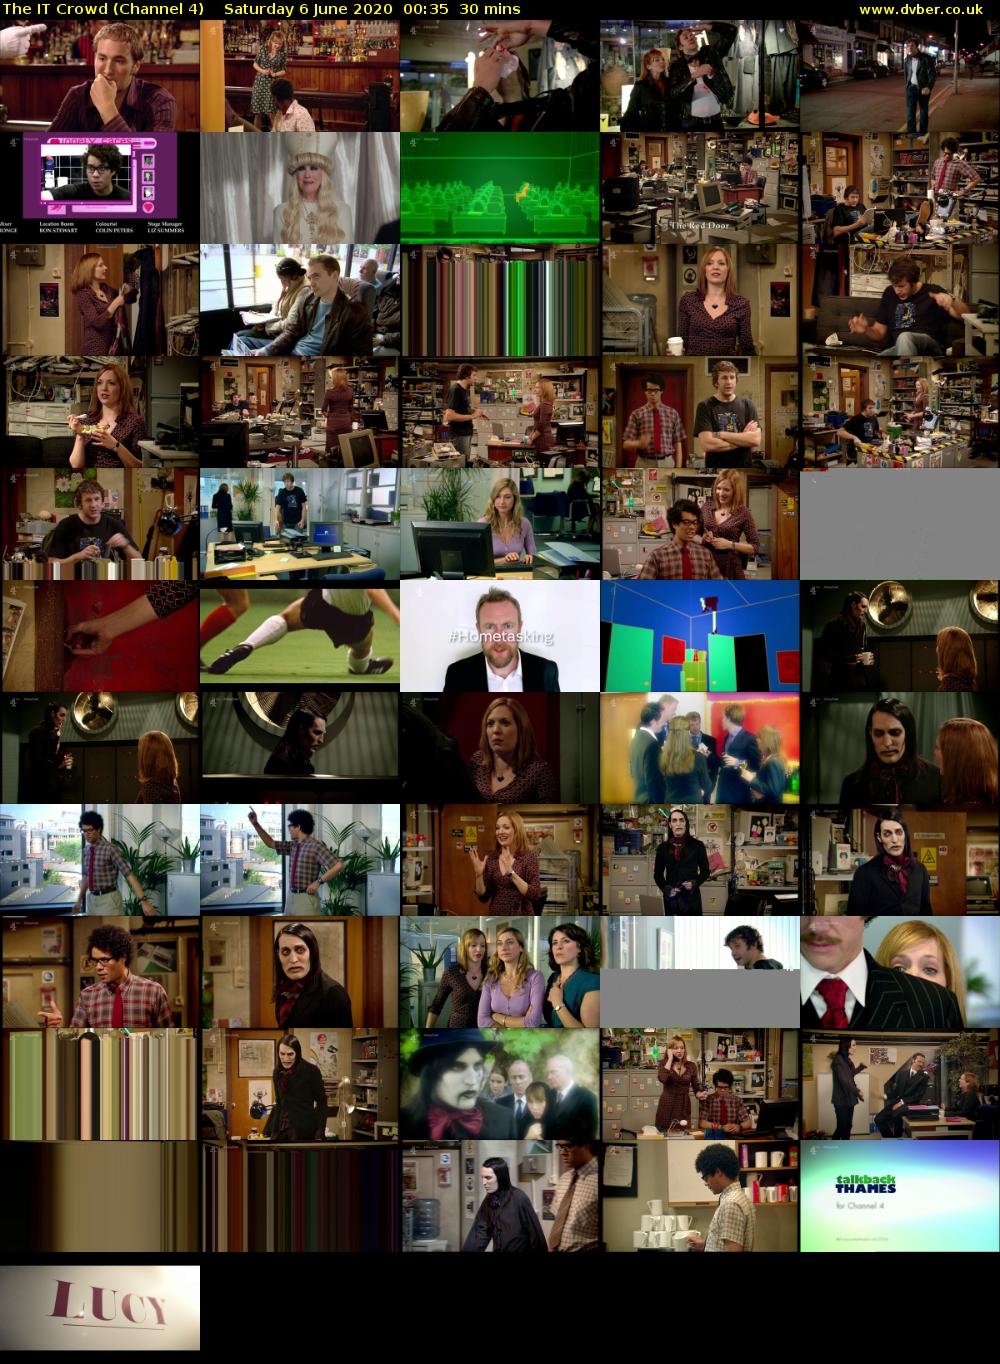 The IT Crowd (Channel 4) Saturday 6 June 2020 00:35 - 01:05